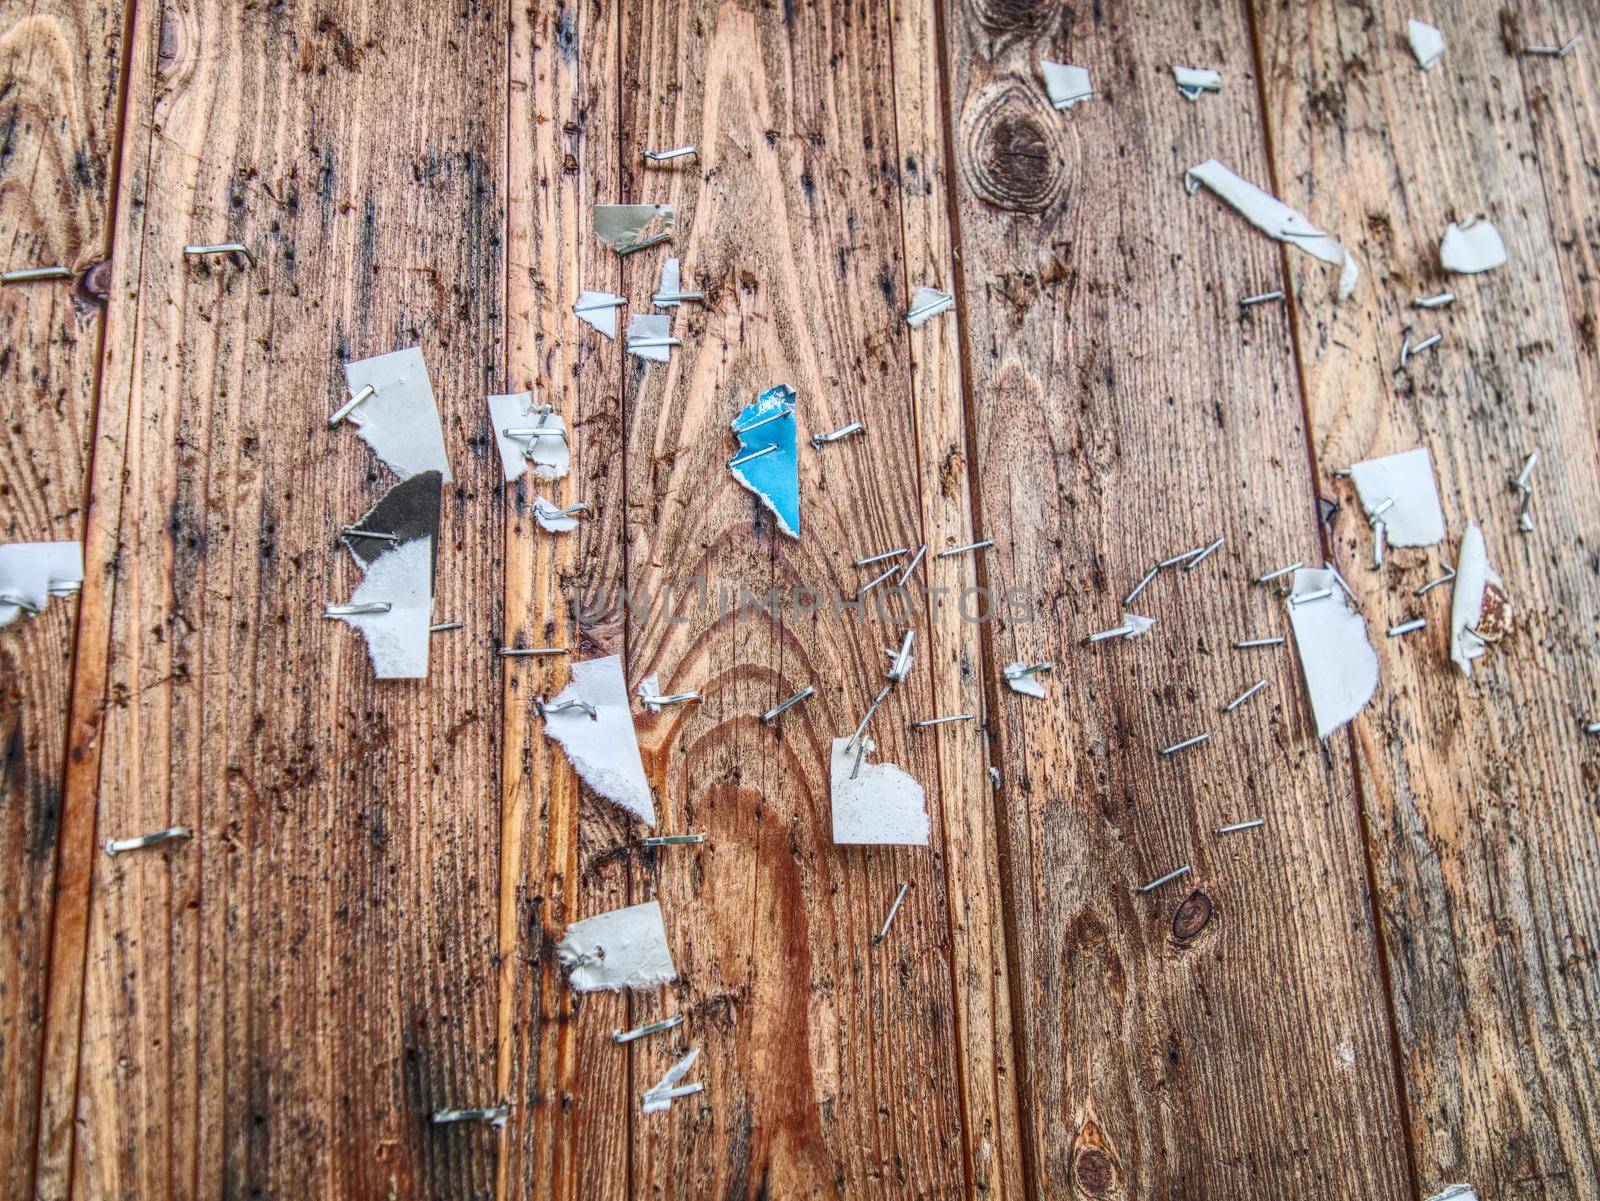 Scraps of paper on a wooden wall or  old wooden fence.  by rdonar2